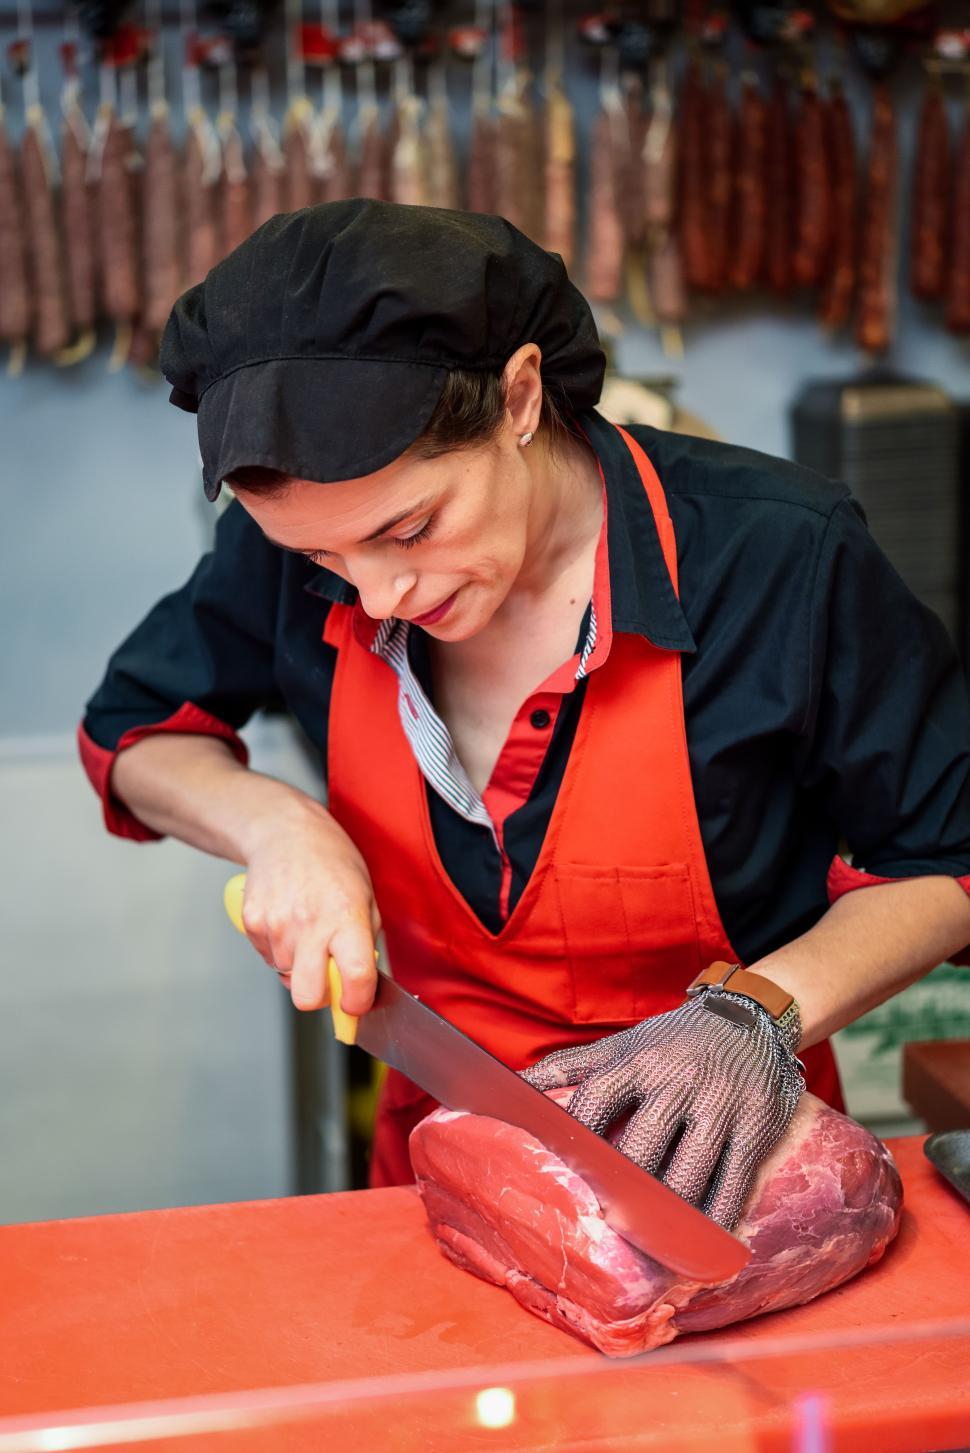 Free Image of Woman cutting fresh meat in a butcher shop with metal safety mesh glove 